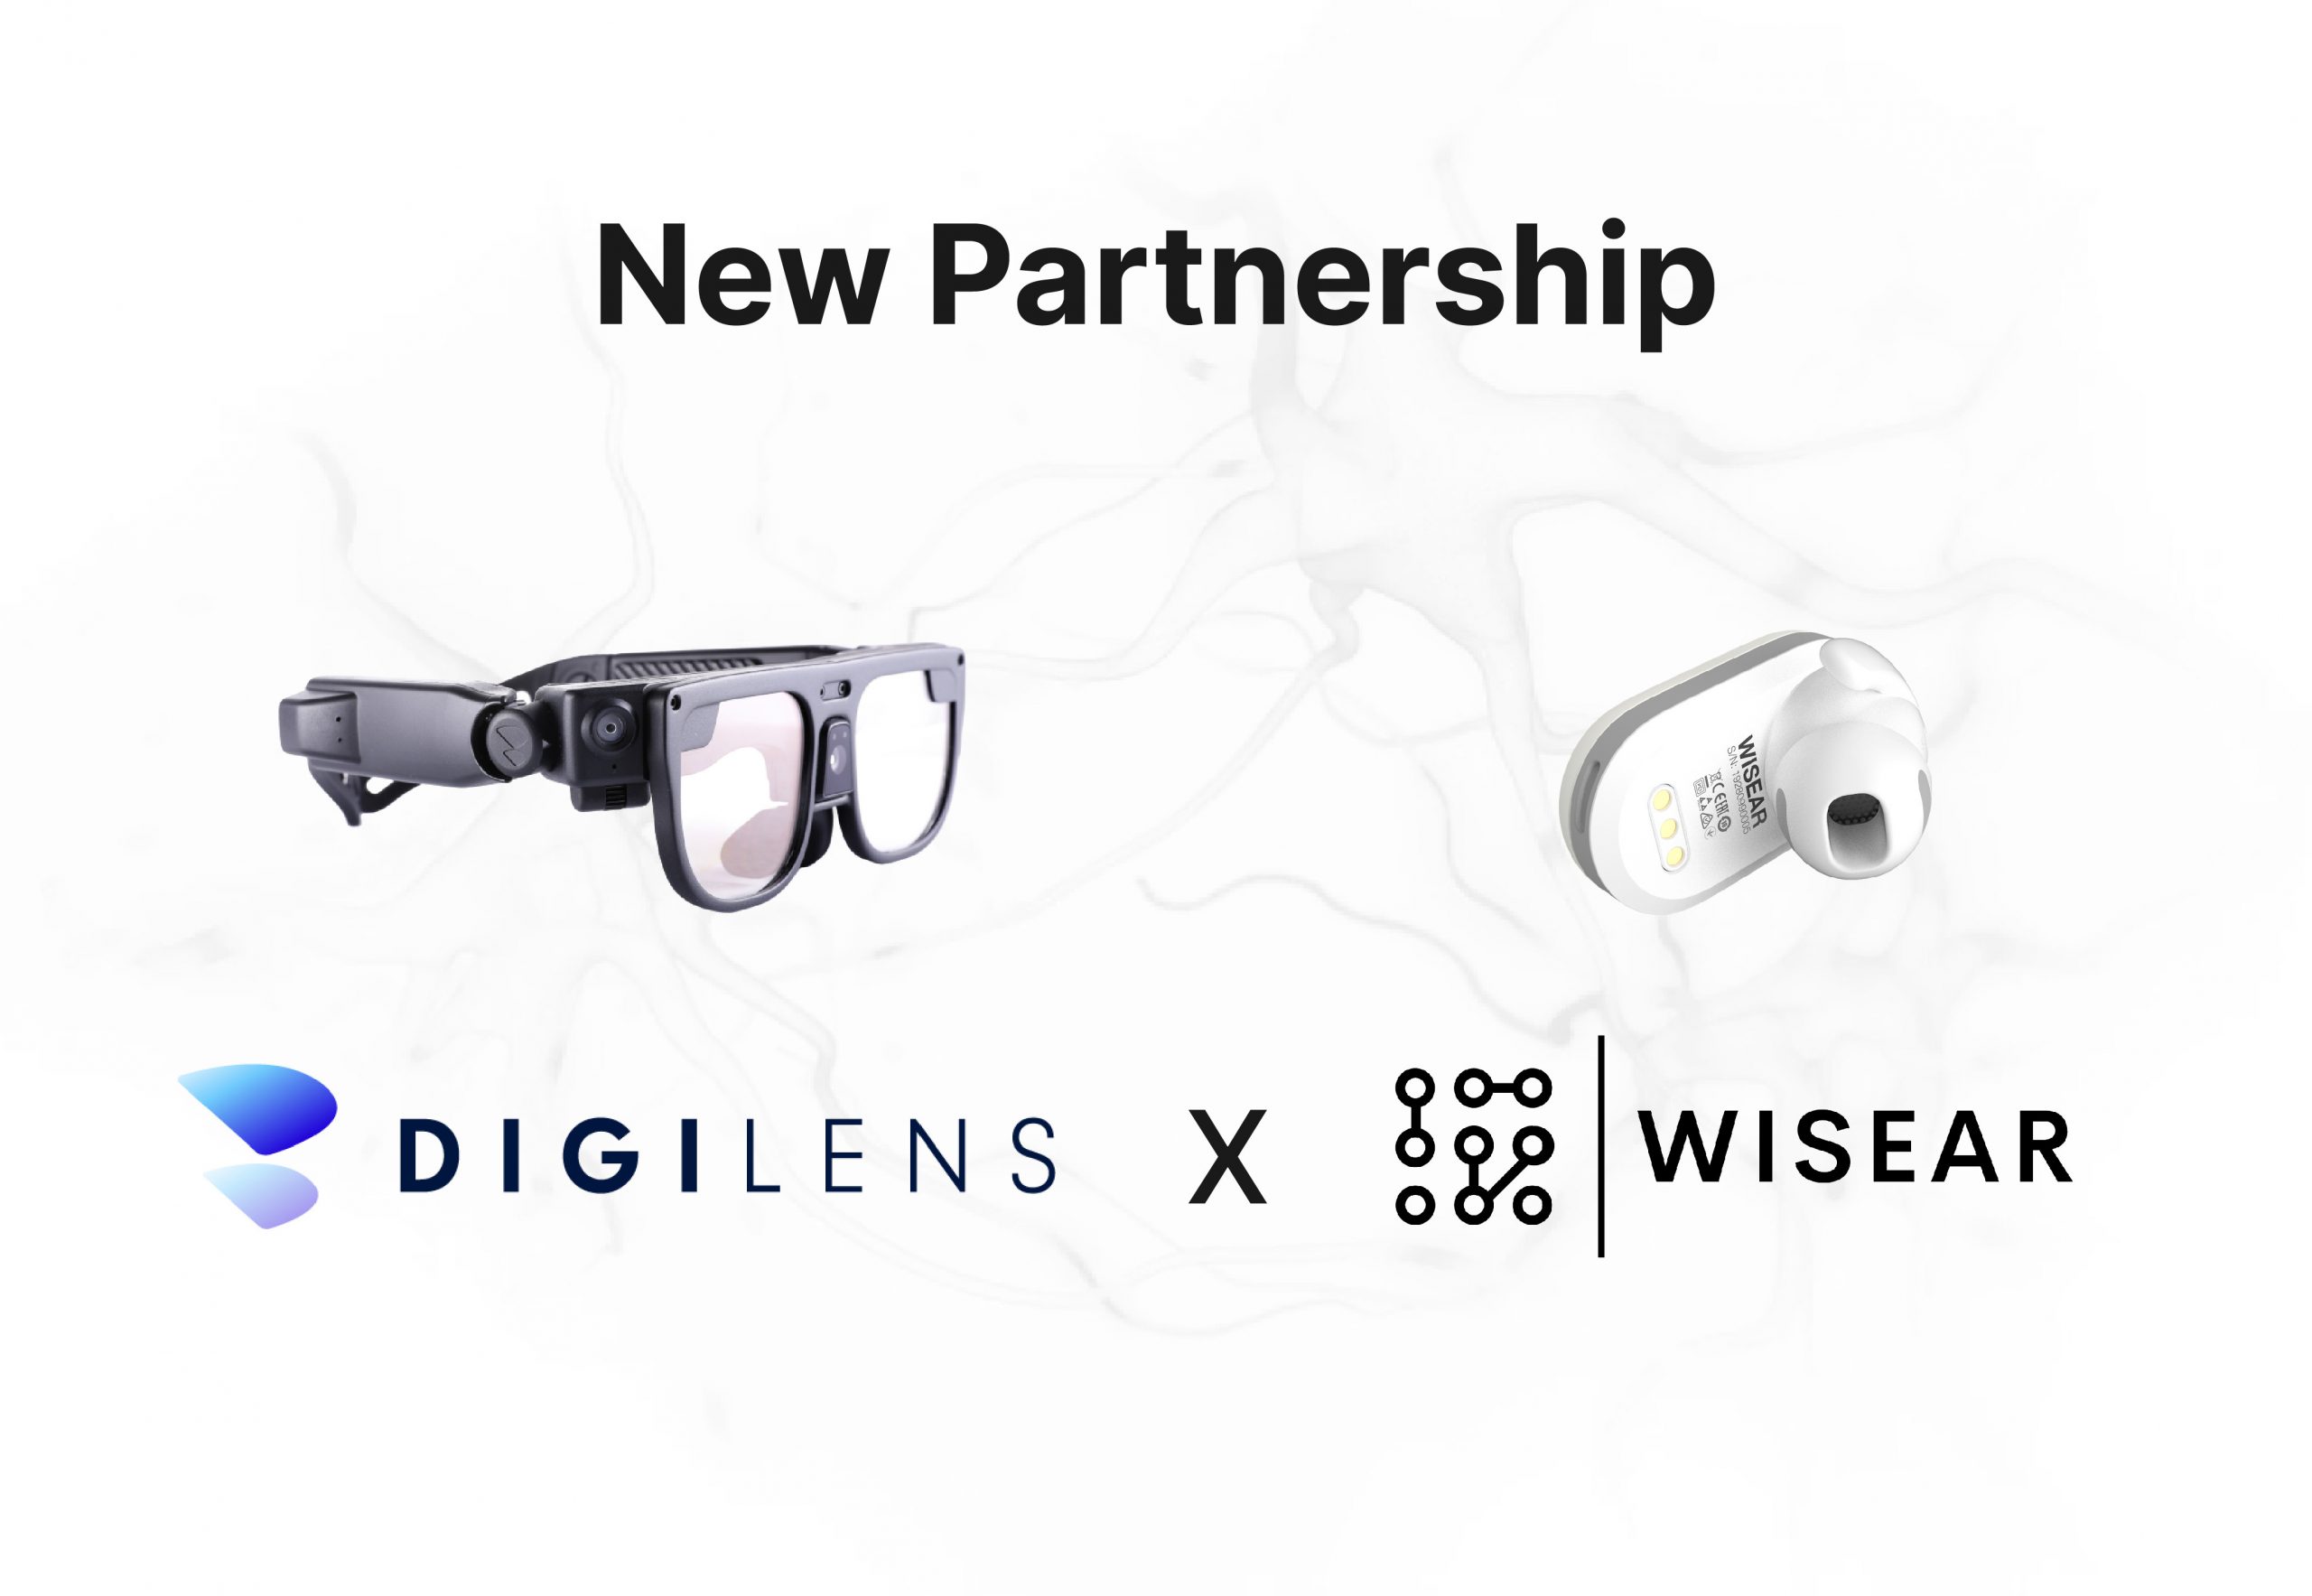 Wisear and DigiLens Announce Partnership to Deliver Seamless AR Control for Frontline Workers